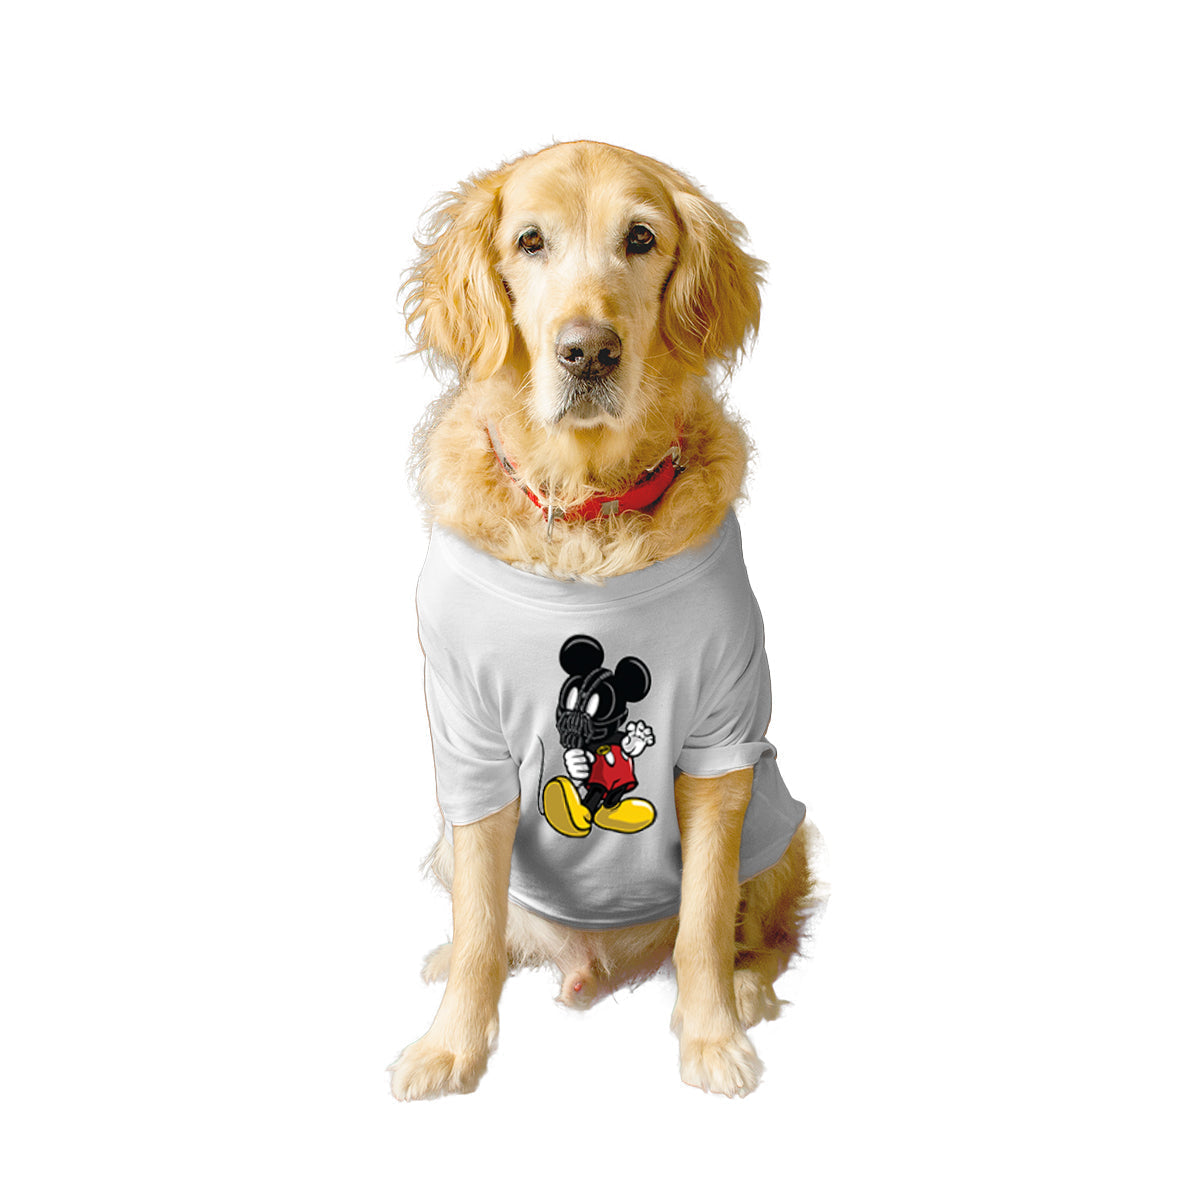 Ruse XX-Small (Chihuahuas, Papillons) / White Ruse Basic Crew Neck 'Mouse Bane' Printed Half Sleeves Dog Tee6